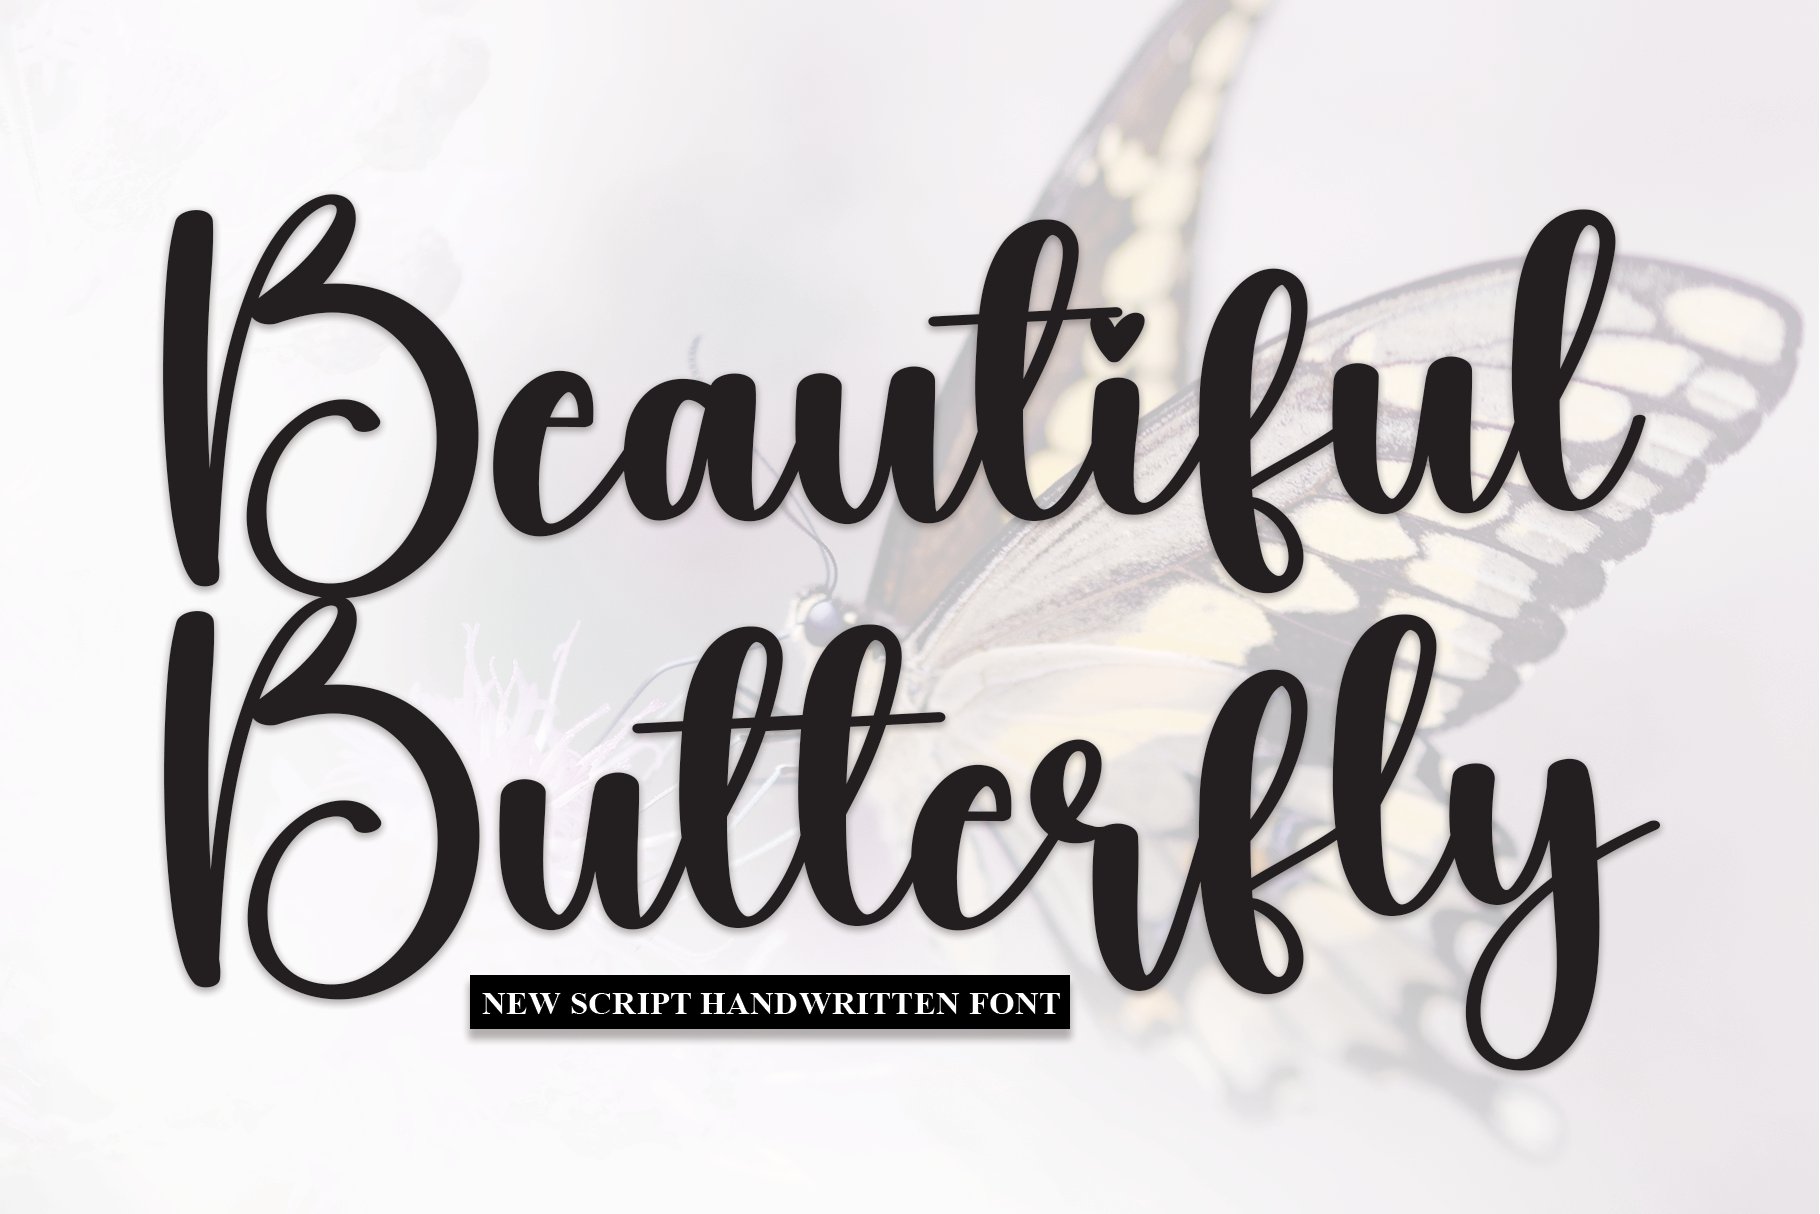 Beautiful Butterfly | Script Font cover image.